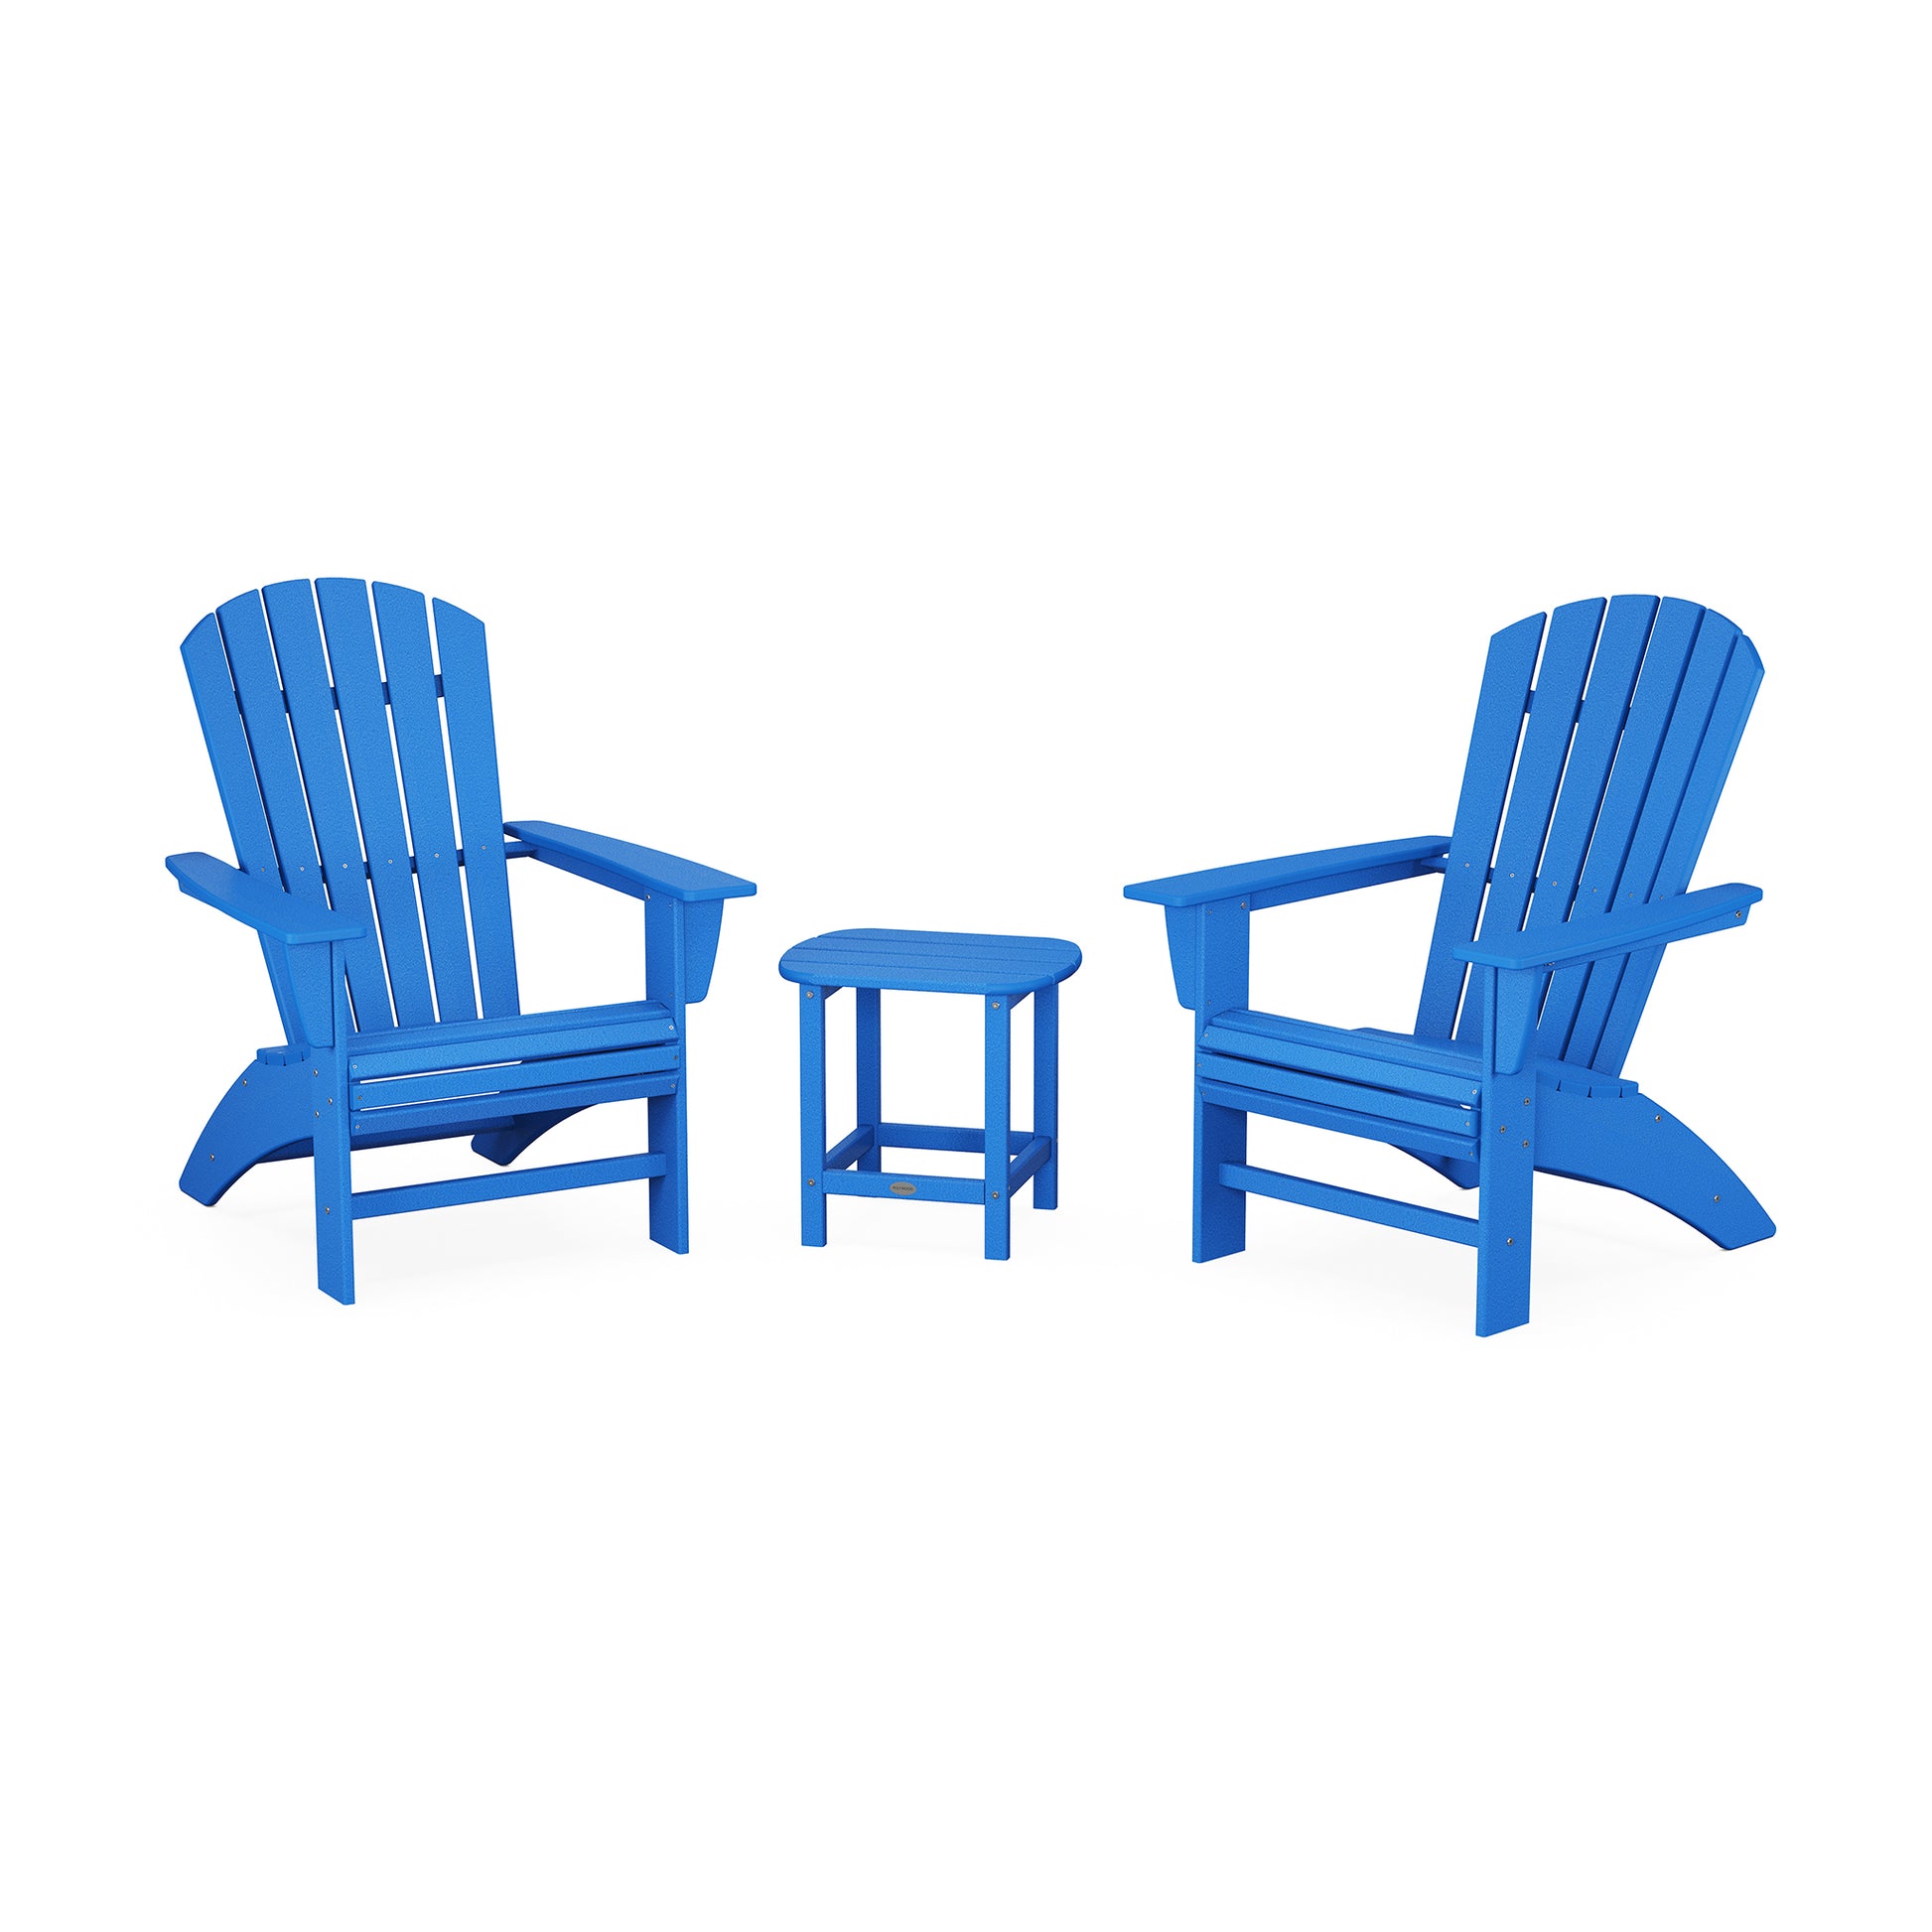 Two blue POLYWOOD Nautical 3-Piece Curveback Adirondack Sets with a matching small side table, set against a plain white background.